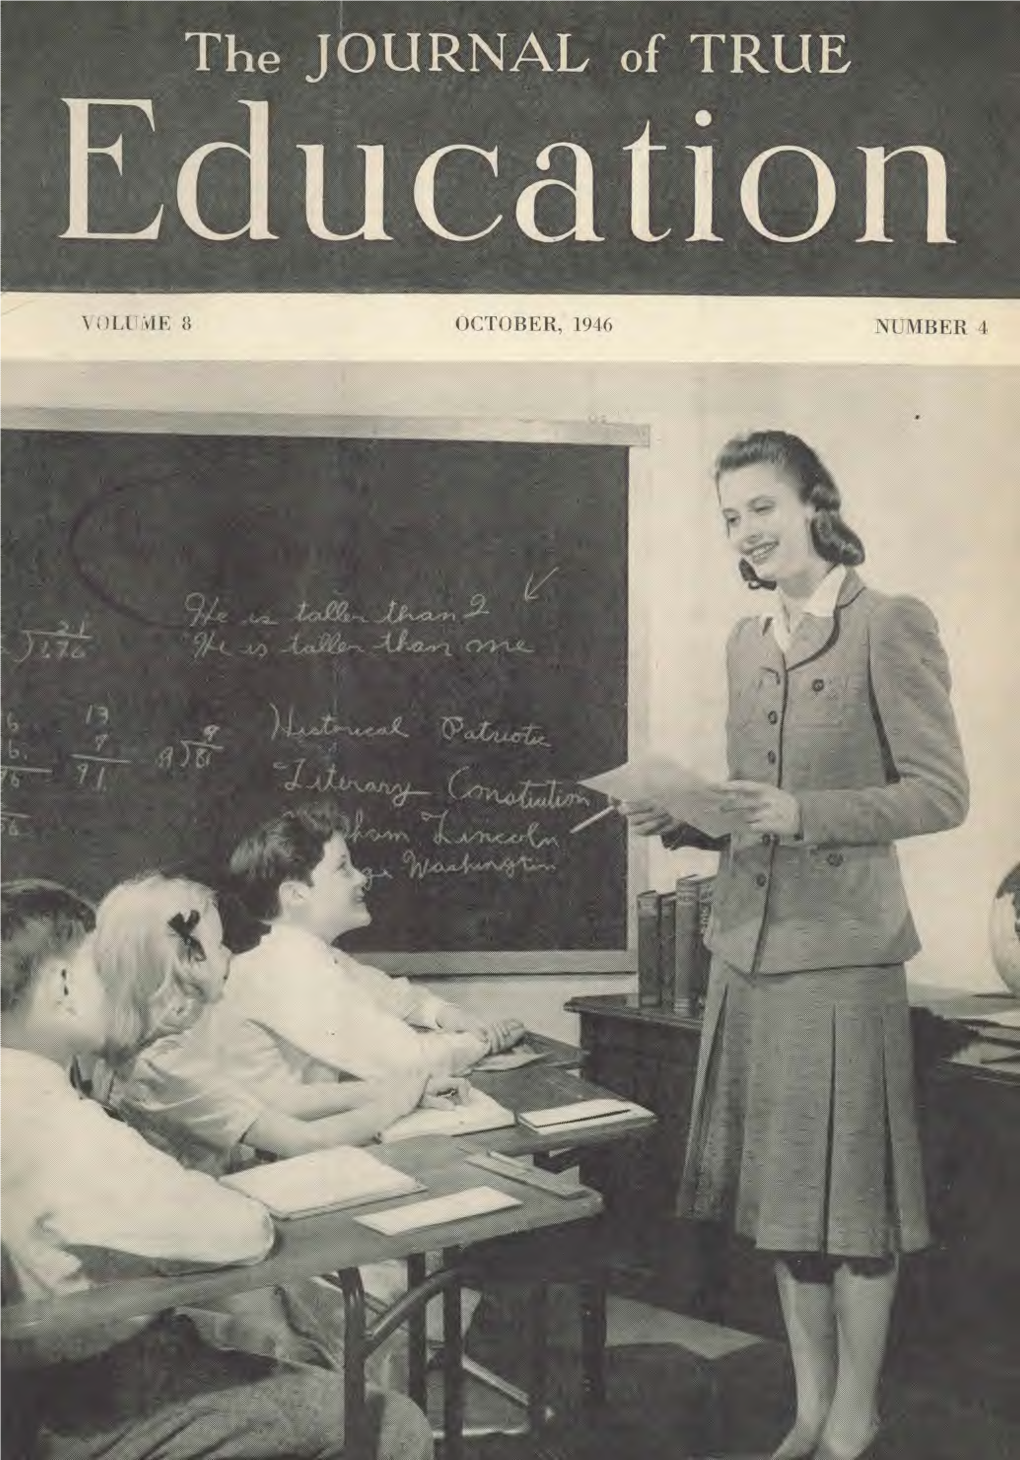 The Journal of True Education for 1946